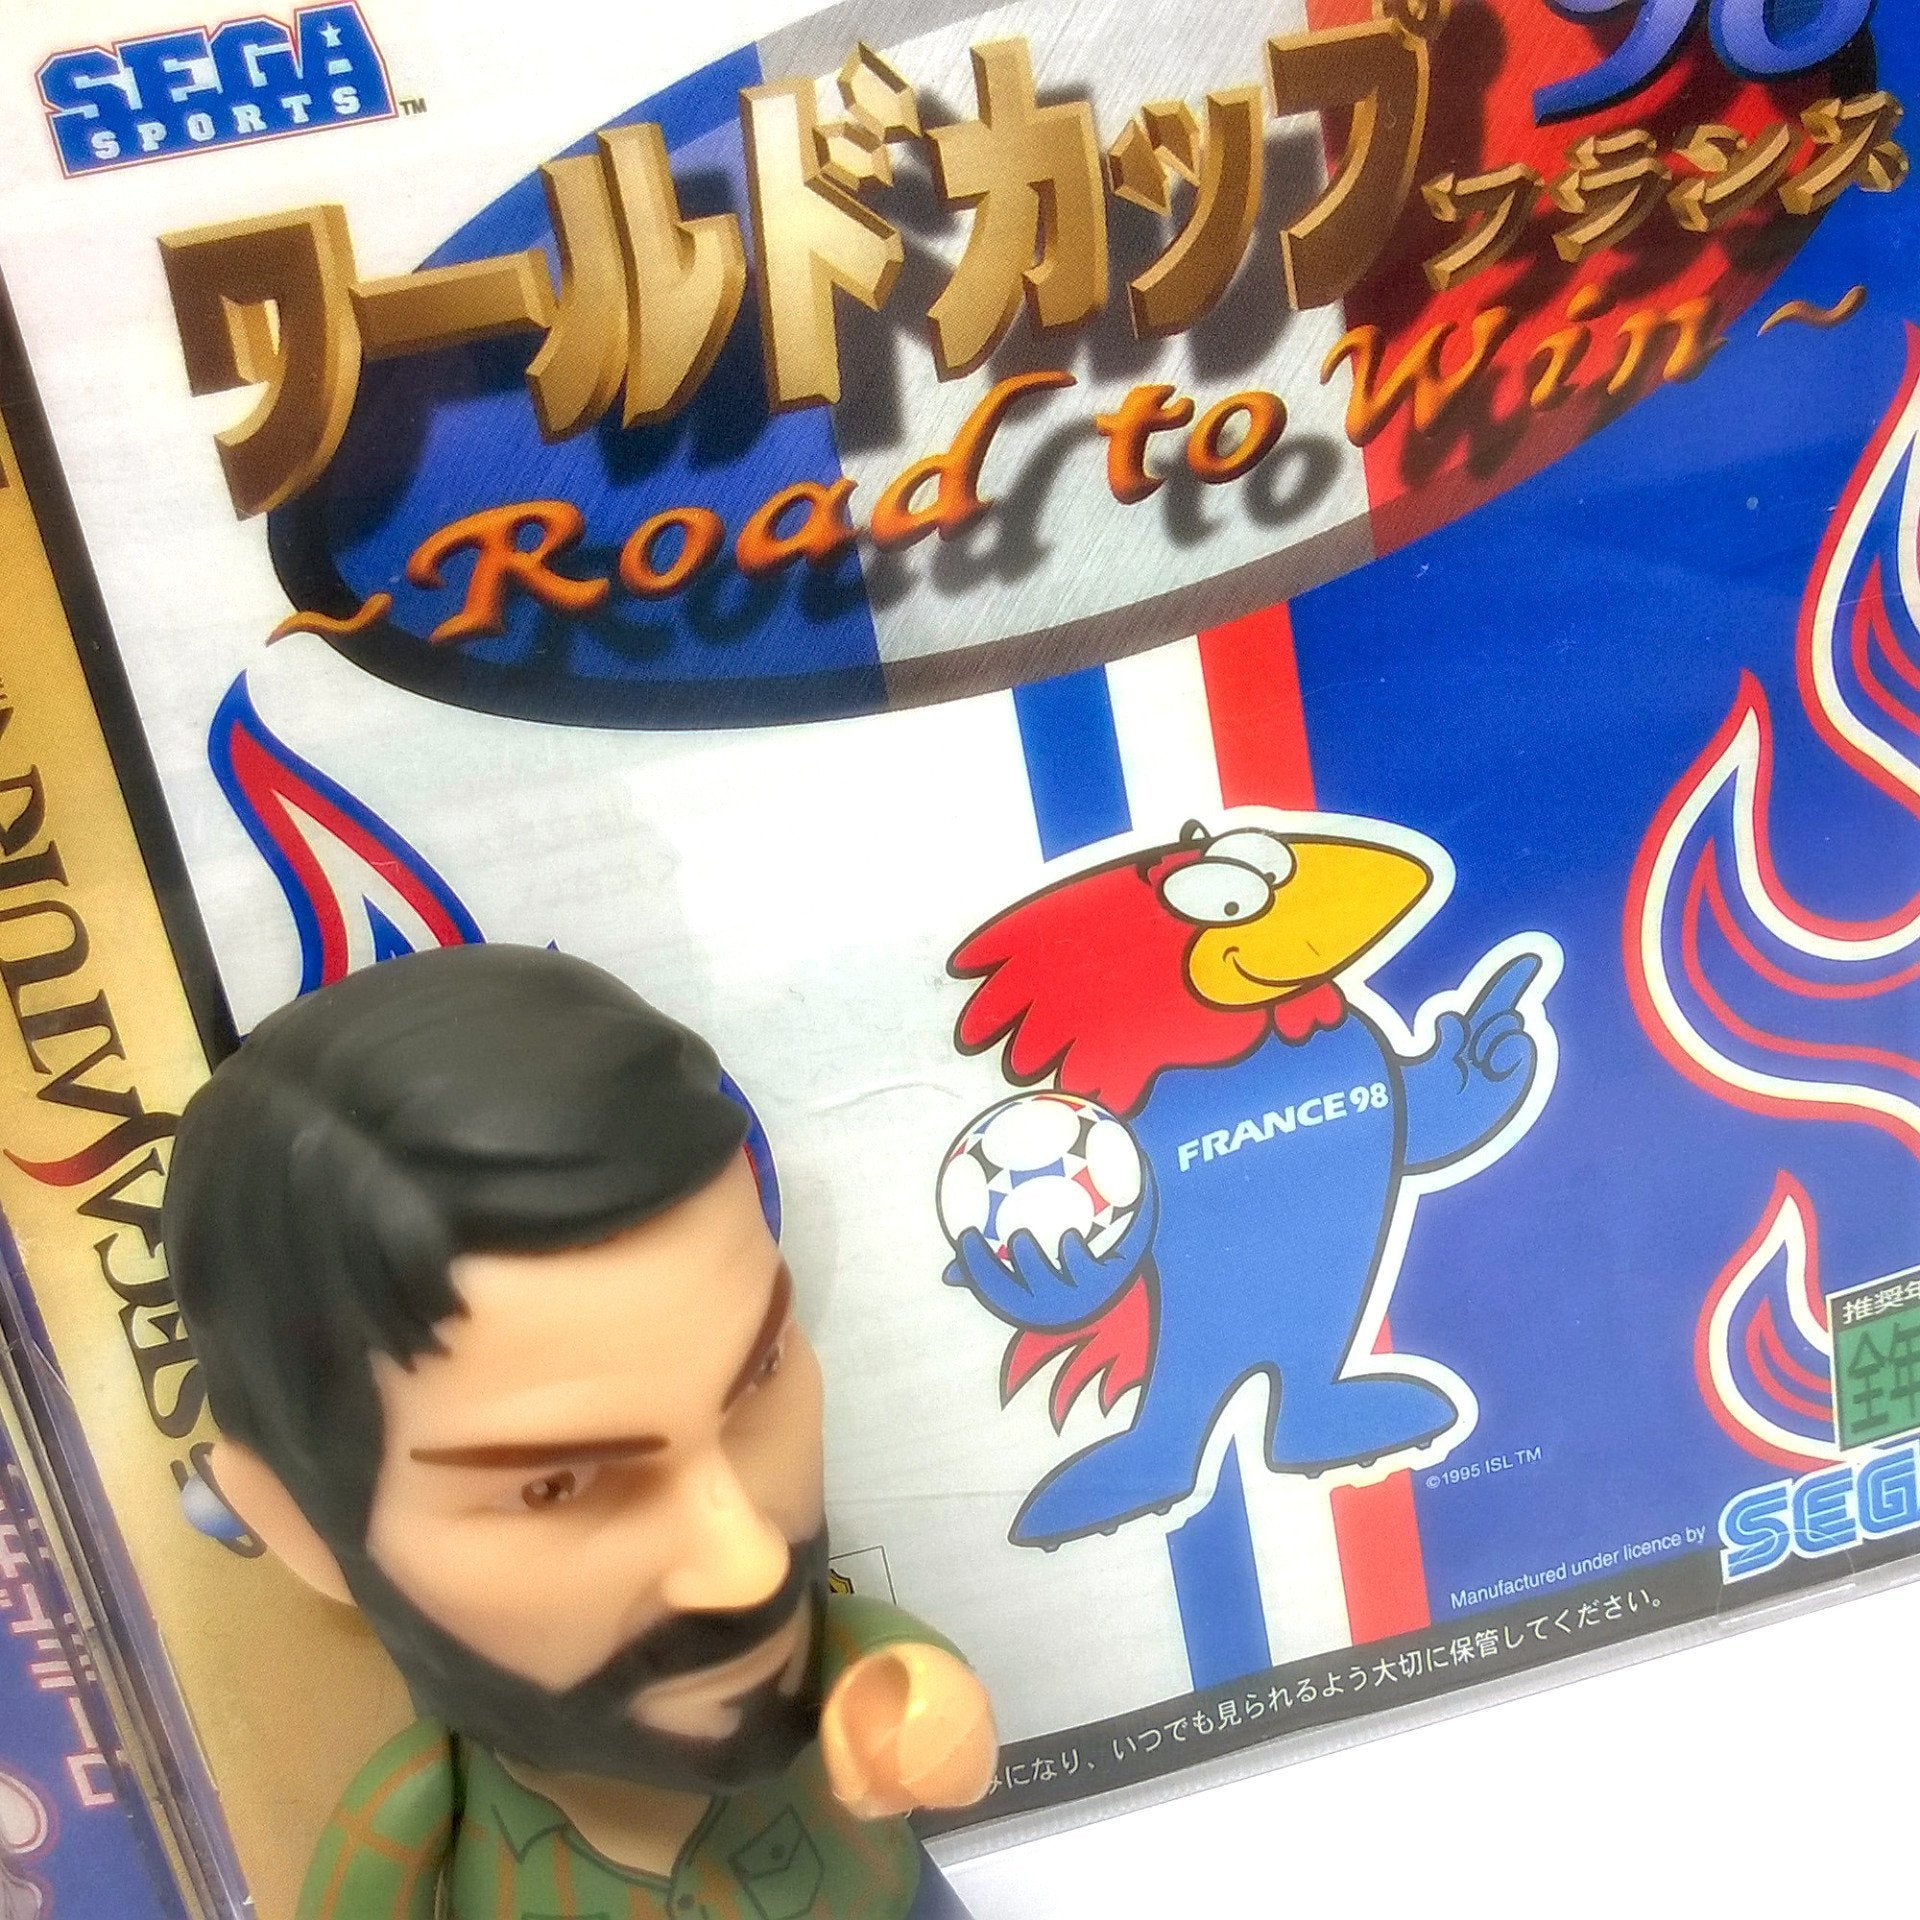 World Cup '98 France: Road to Win Import Sega Saturn Game